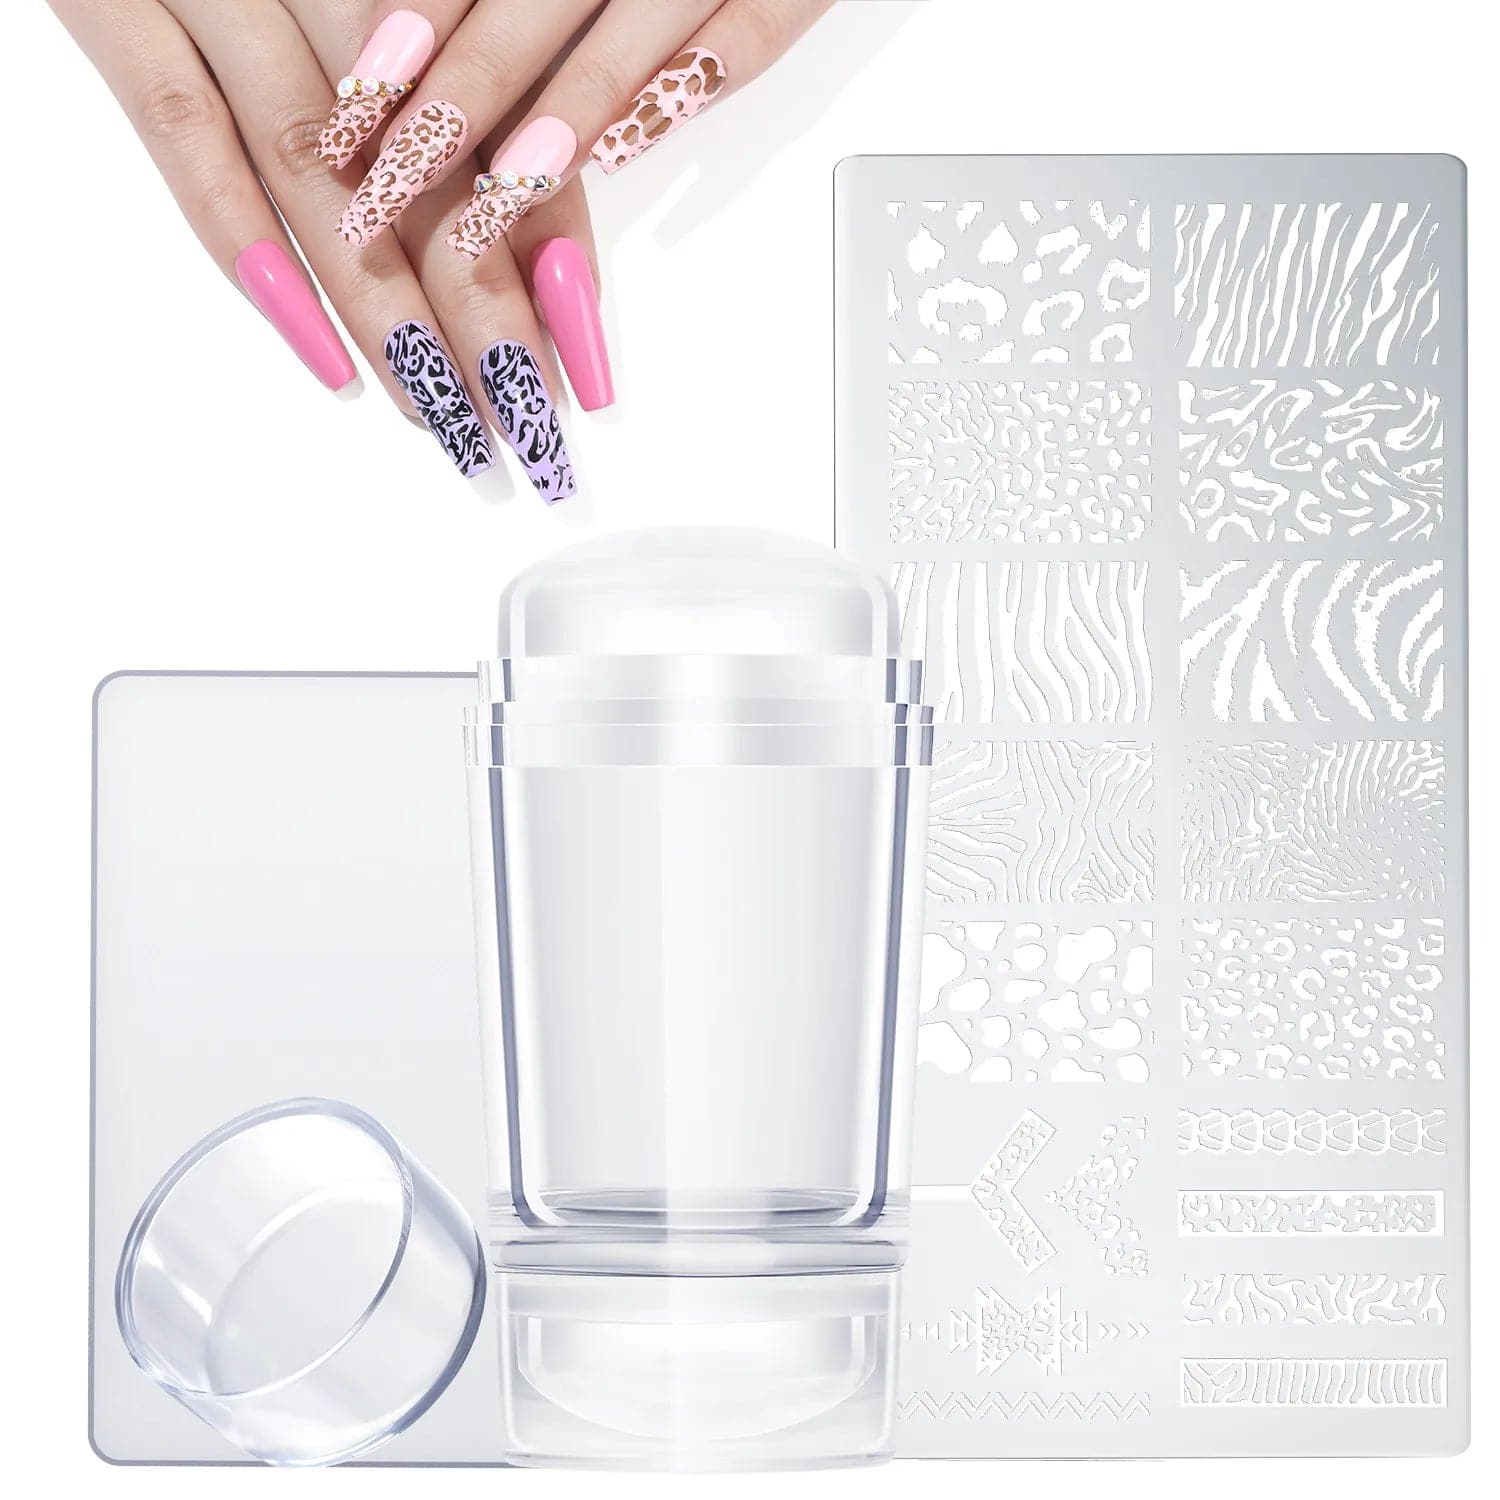 Wild Party - Nail Stamping Plates